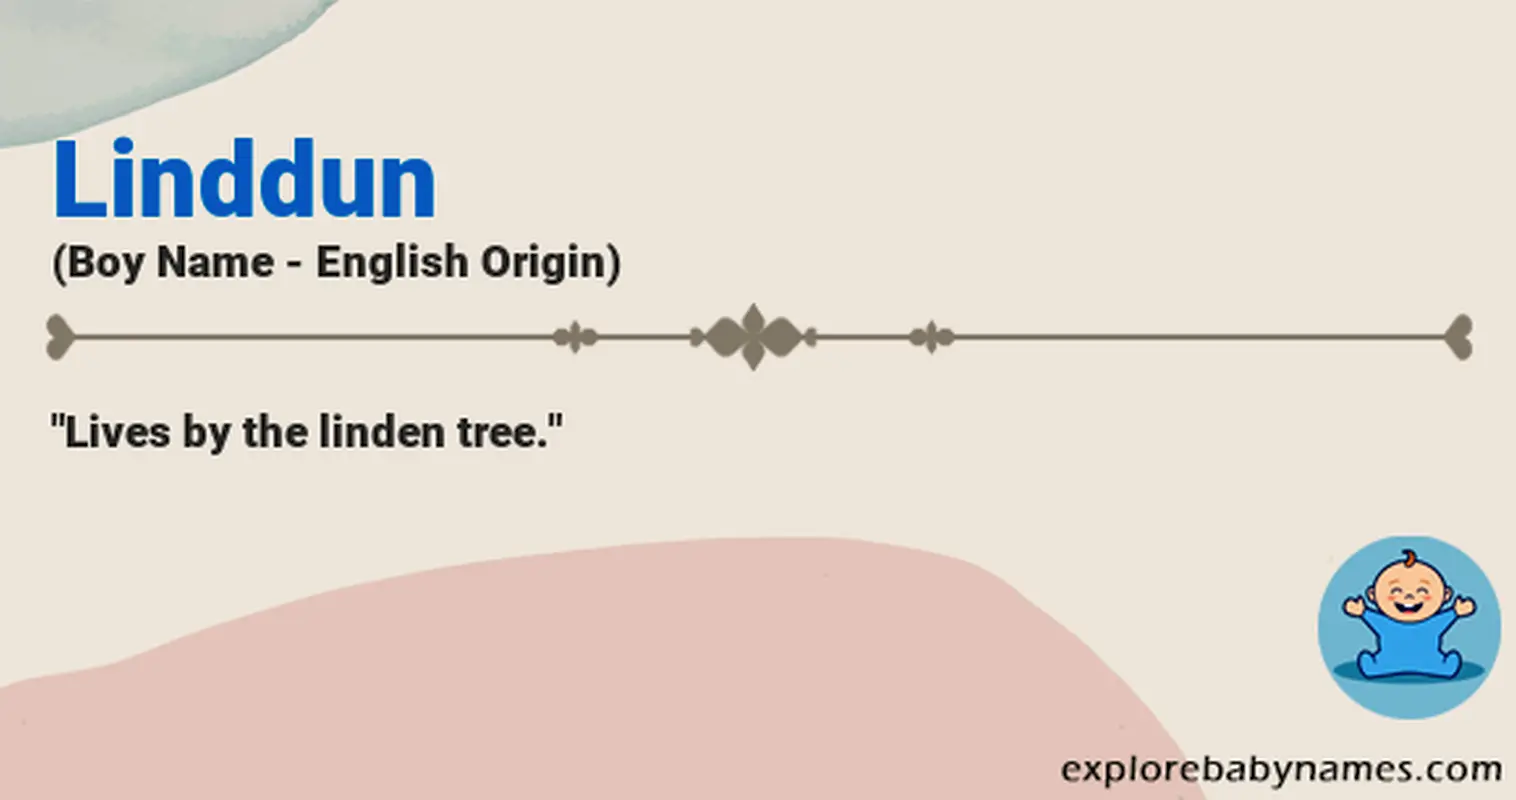 Meaning of Linddun